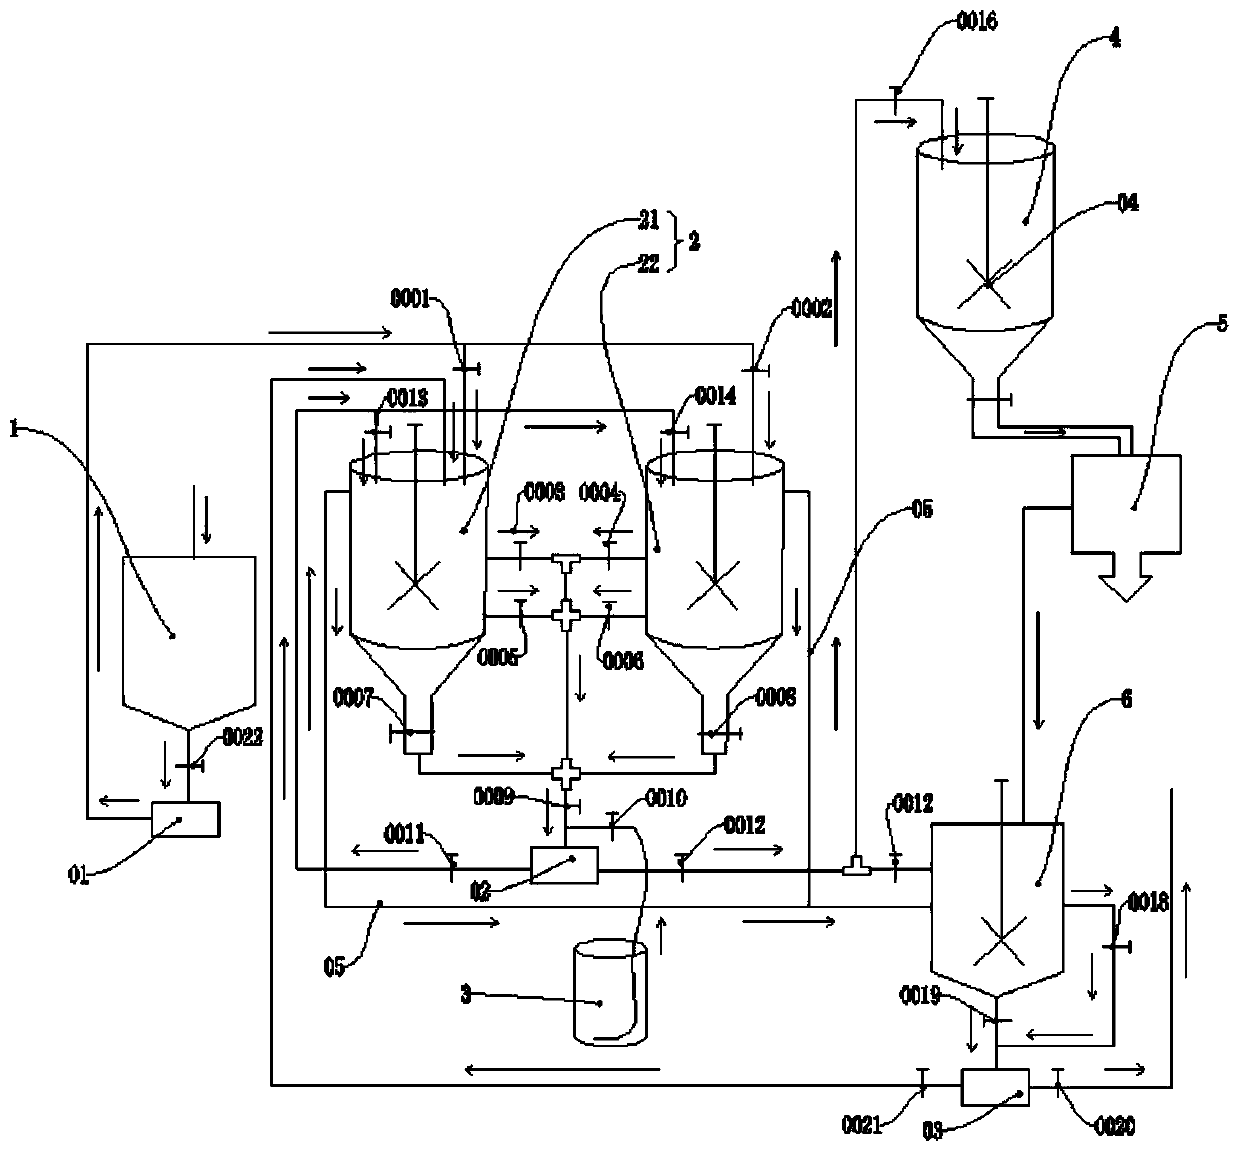 A system and process for recycling aluminum hydroxide from moulding liquid